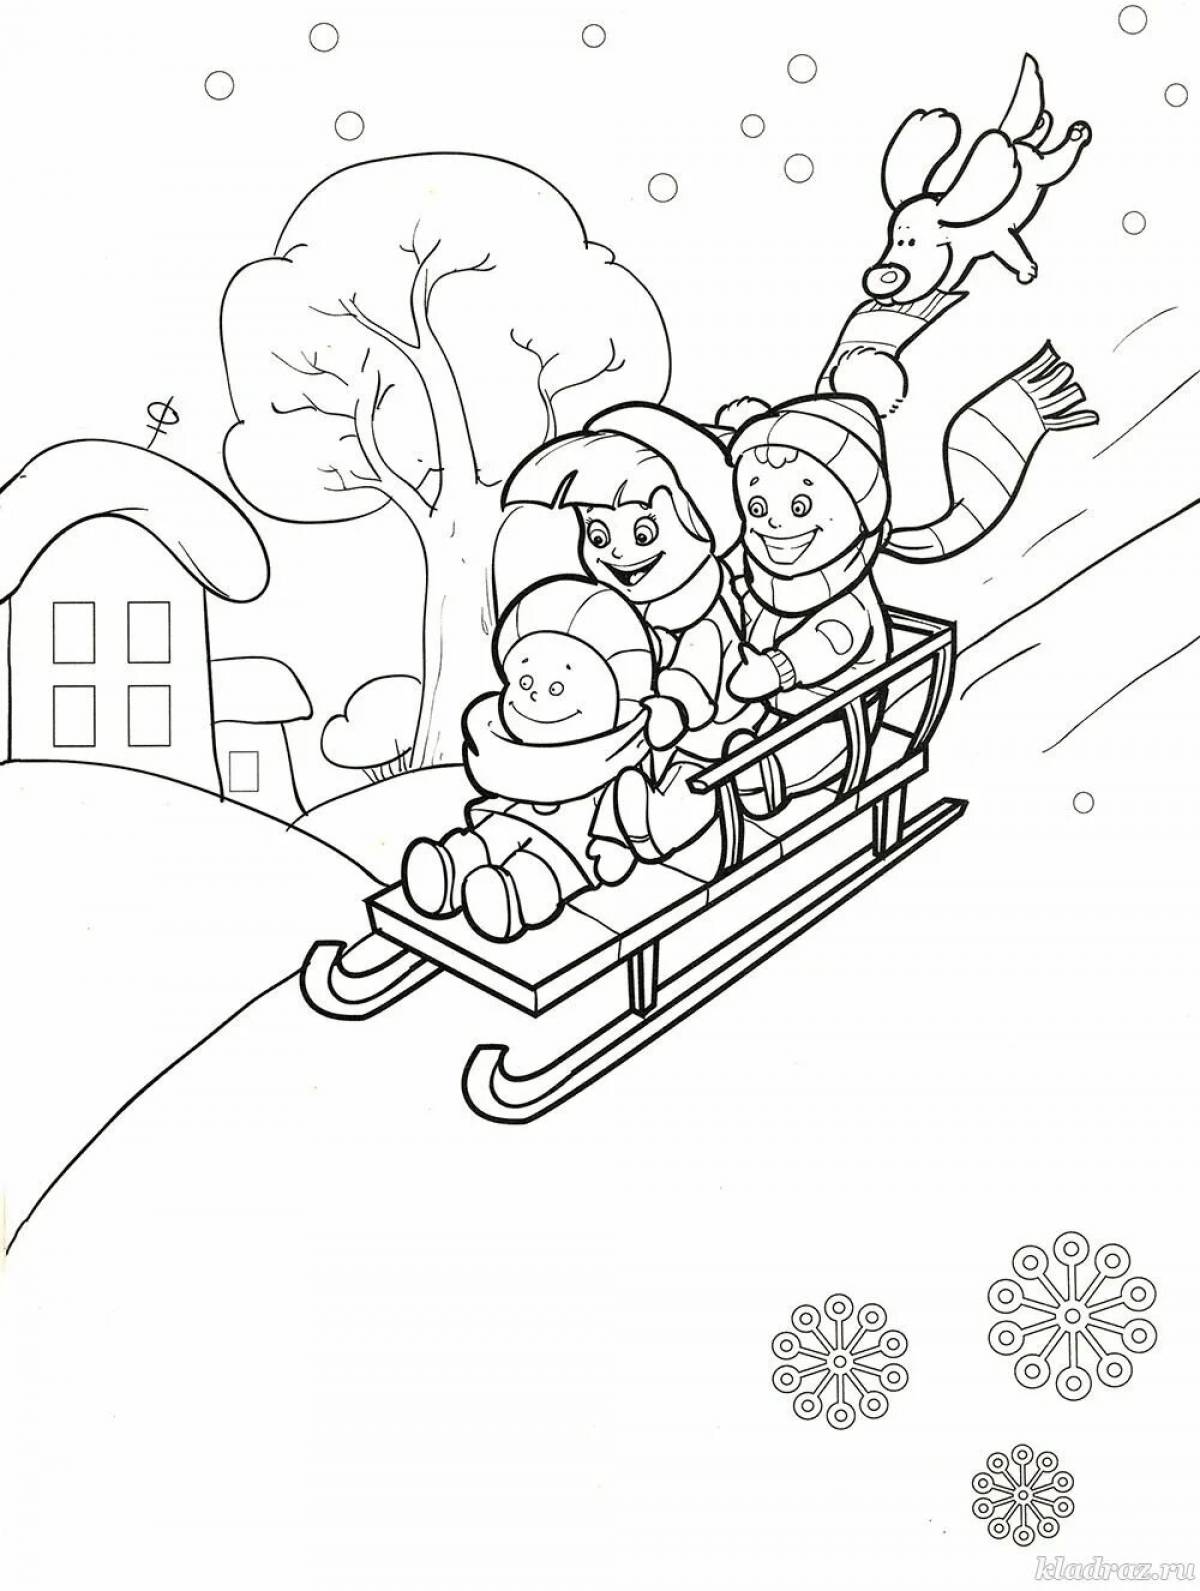 Suggestive winter traffic coloring pages for kids